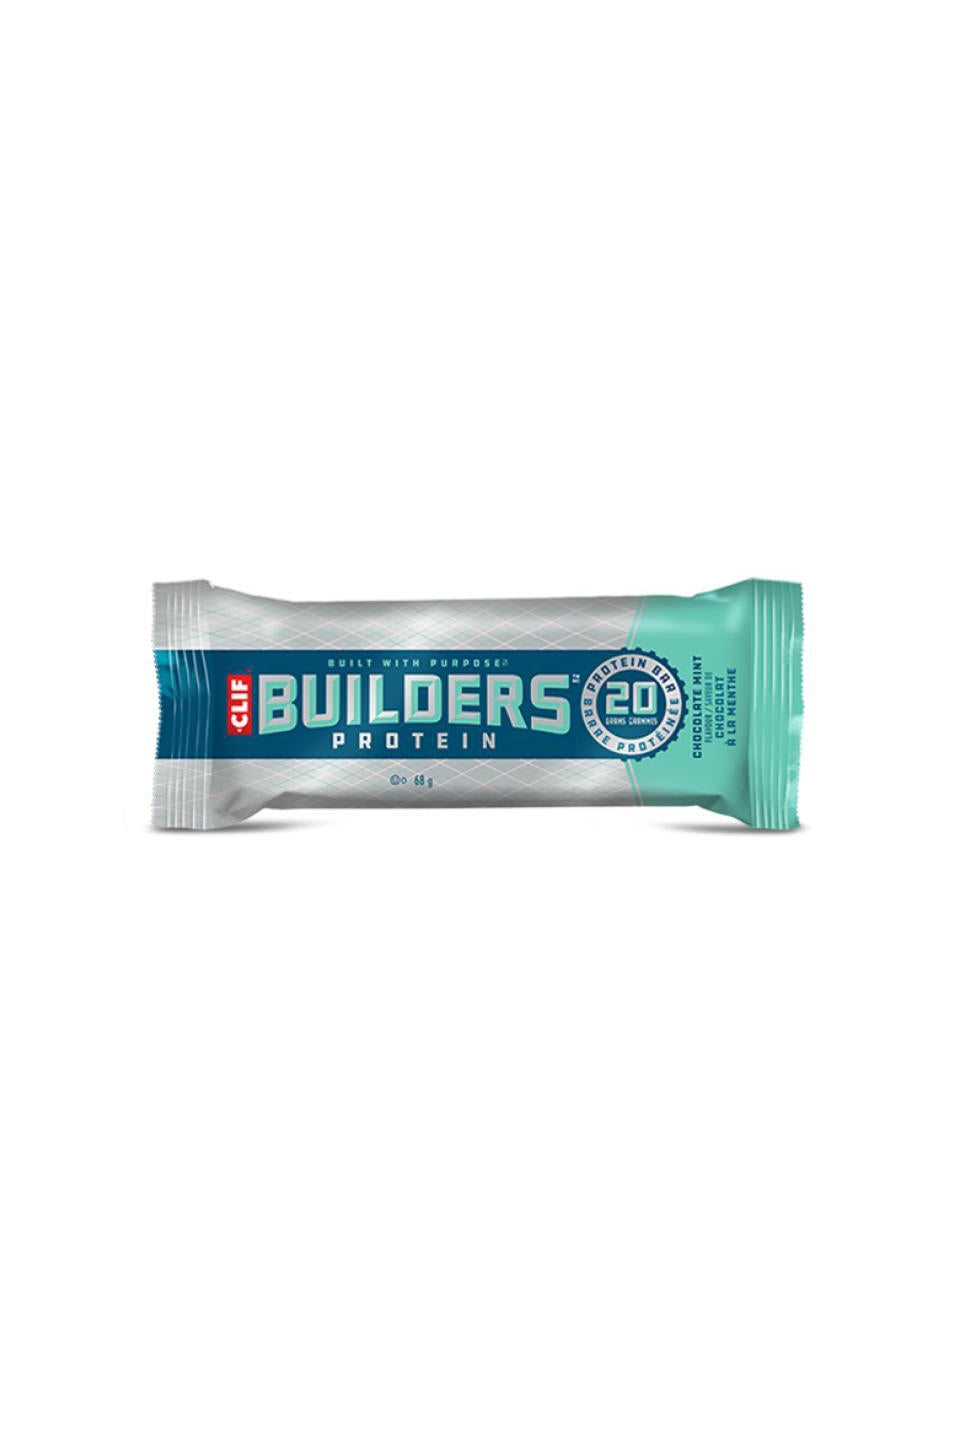 Clif Builders Protein - Chocolate Mint 68g